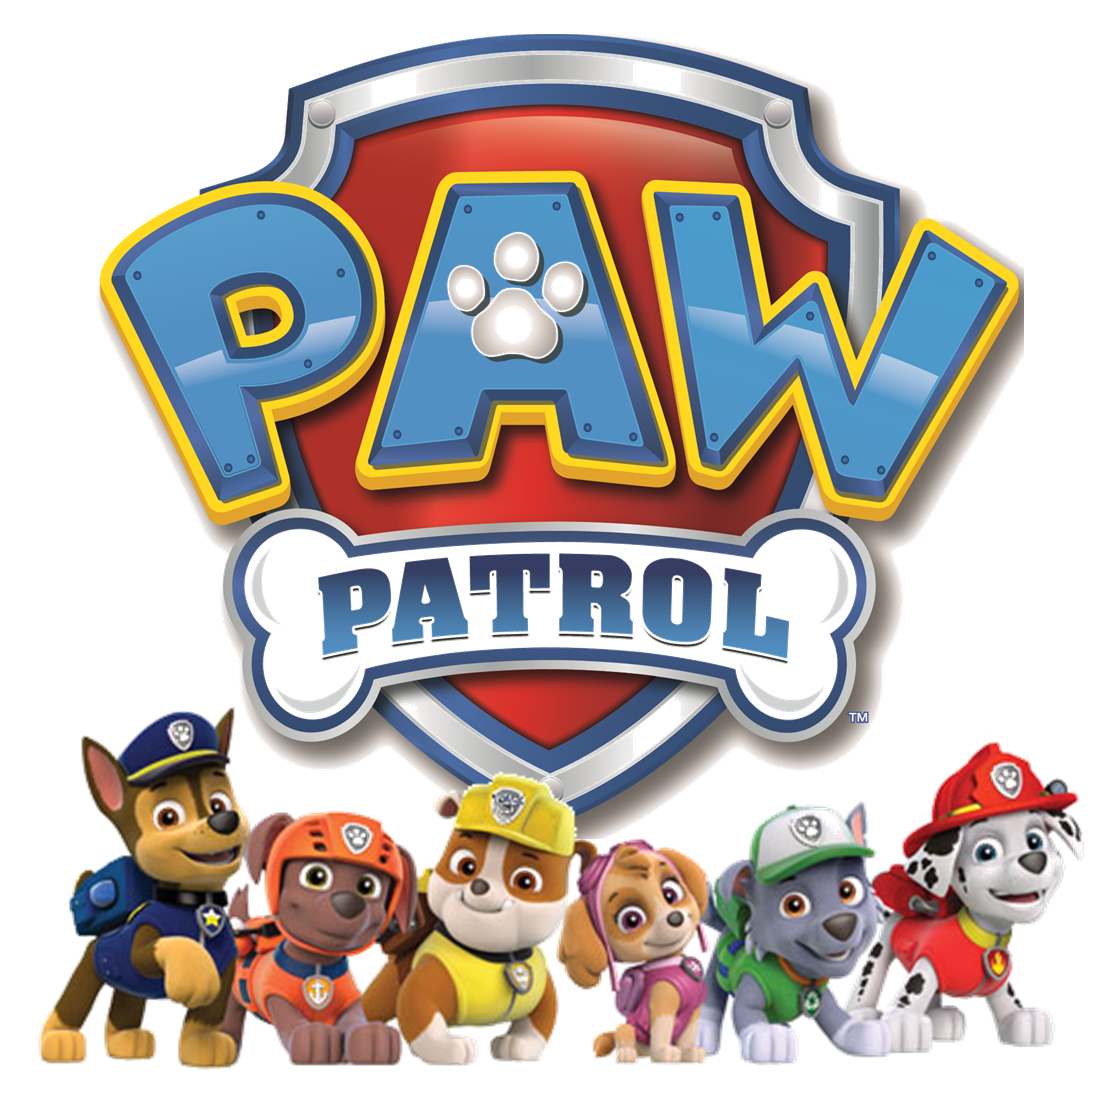 Paw Patrol Iron On Transfer 5" X 5" For Light Colored Fabric